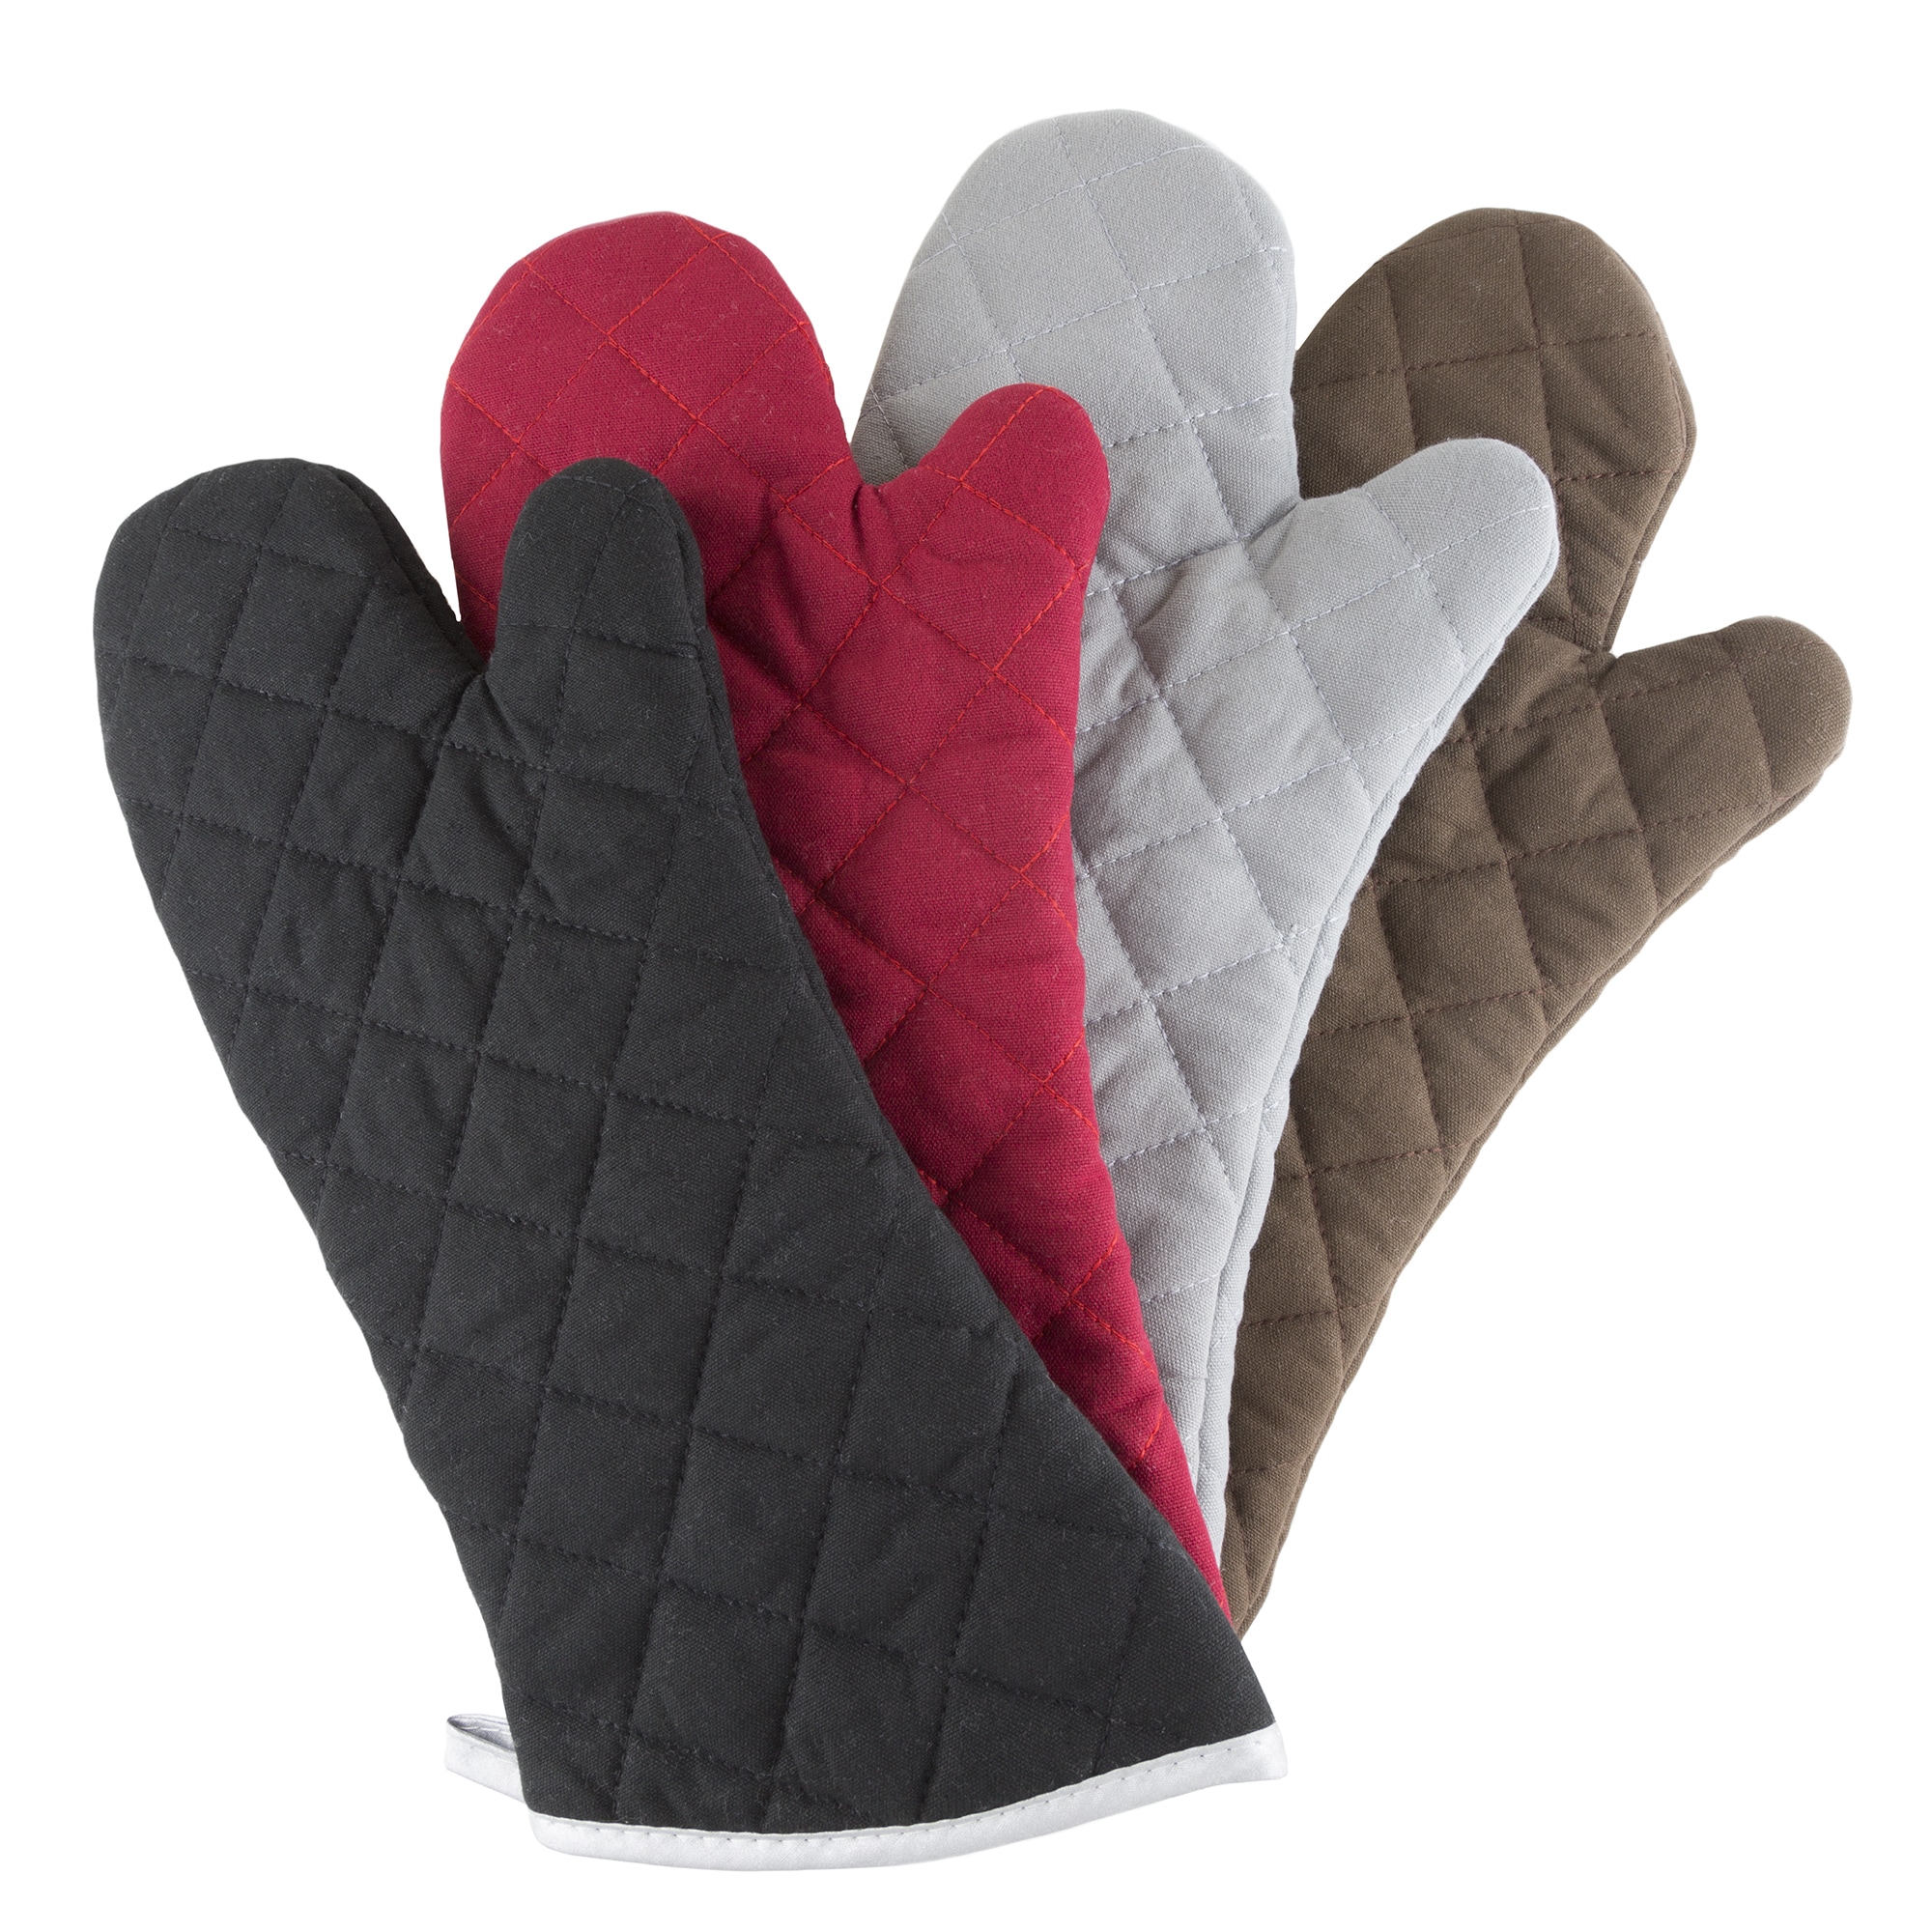 https://ak1.ostkcdn.com/images/products/15635839/Oven-Mitts-Set-of-2-Oversized-Quilted-Mittens-Flame-and-Heat-Resistant-By-Windsor-Home-6c78432f-8029-4ad0-b48d-3b90bc7ef352.jpg